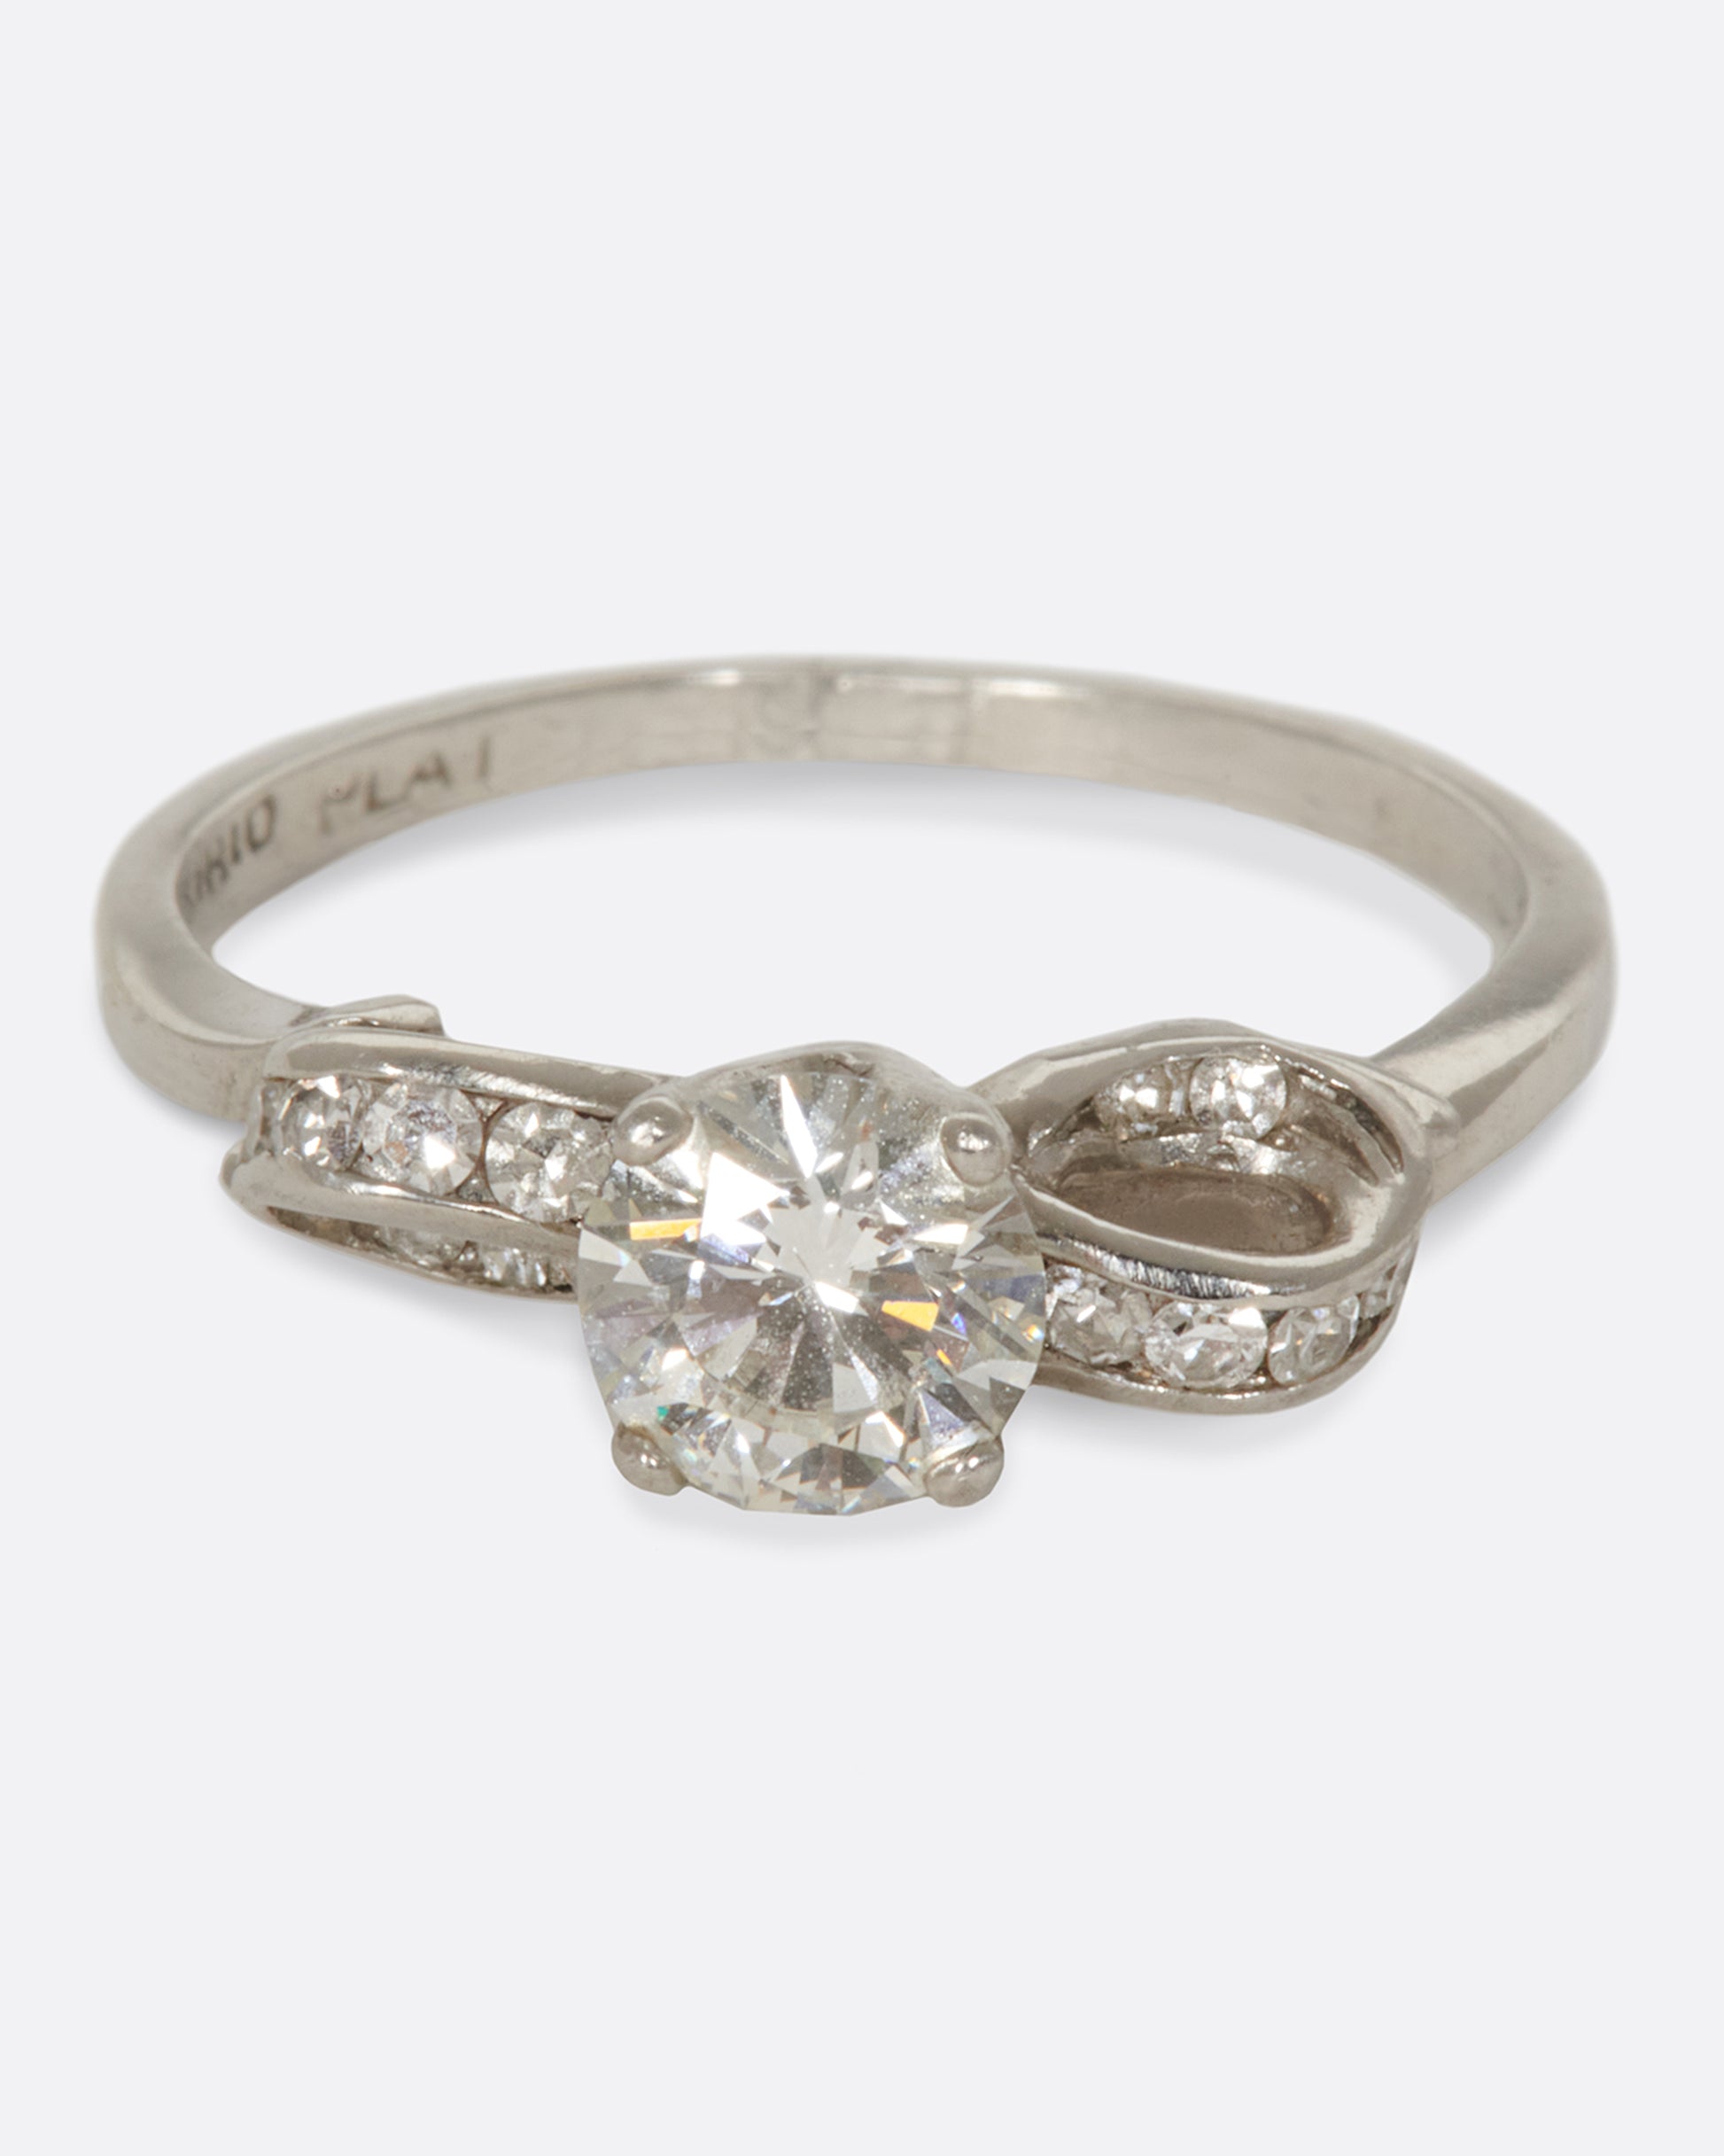 A prong set diamond ring with an infinity loop, covered in tension-set diamonds.